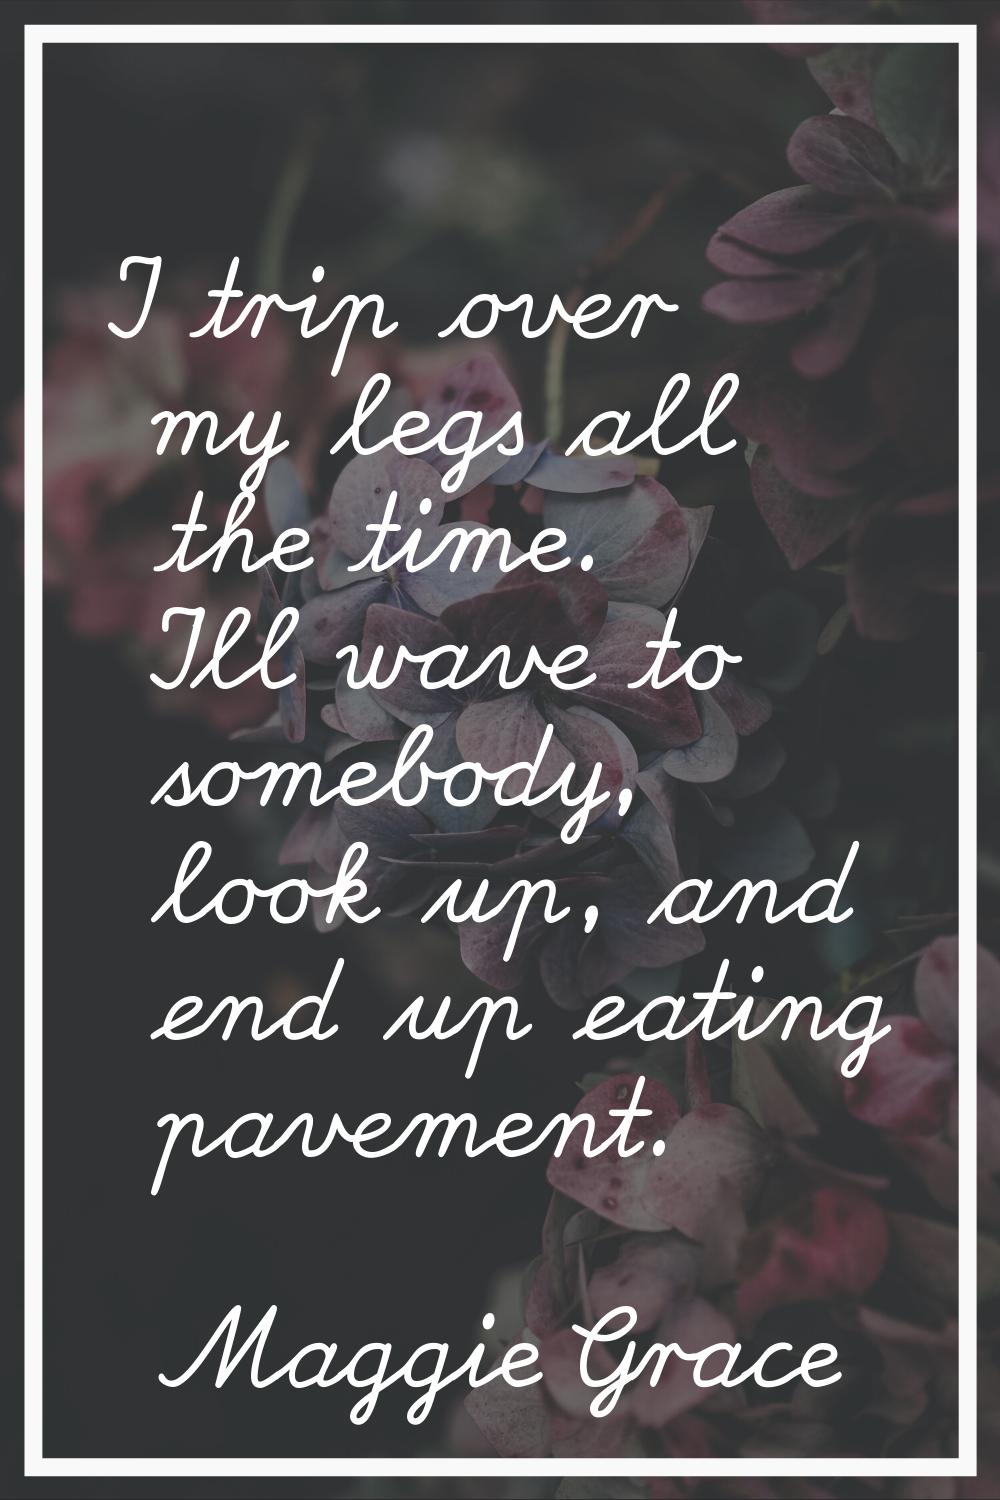 I trip over my legs all the time. I'll wave to somebody, look up, and end up eating pavement.